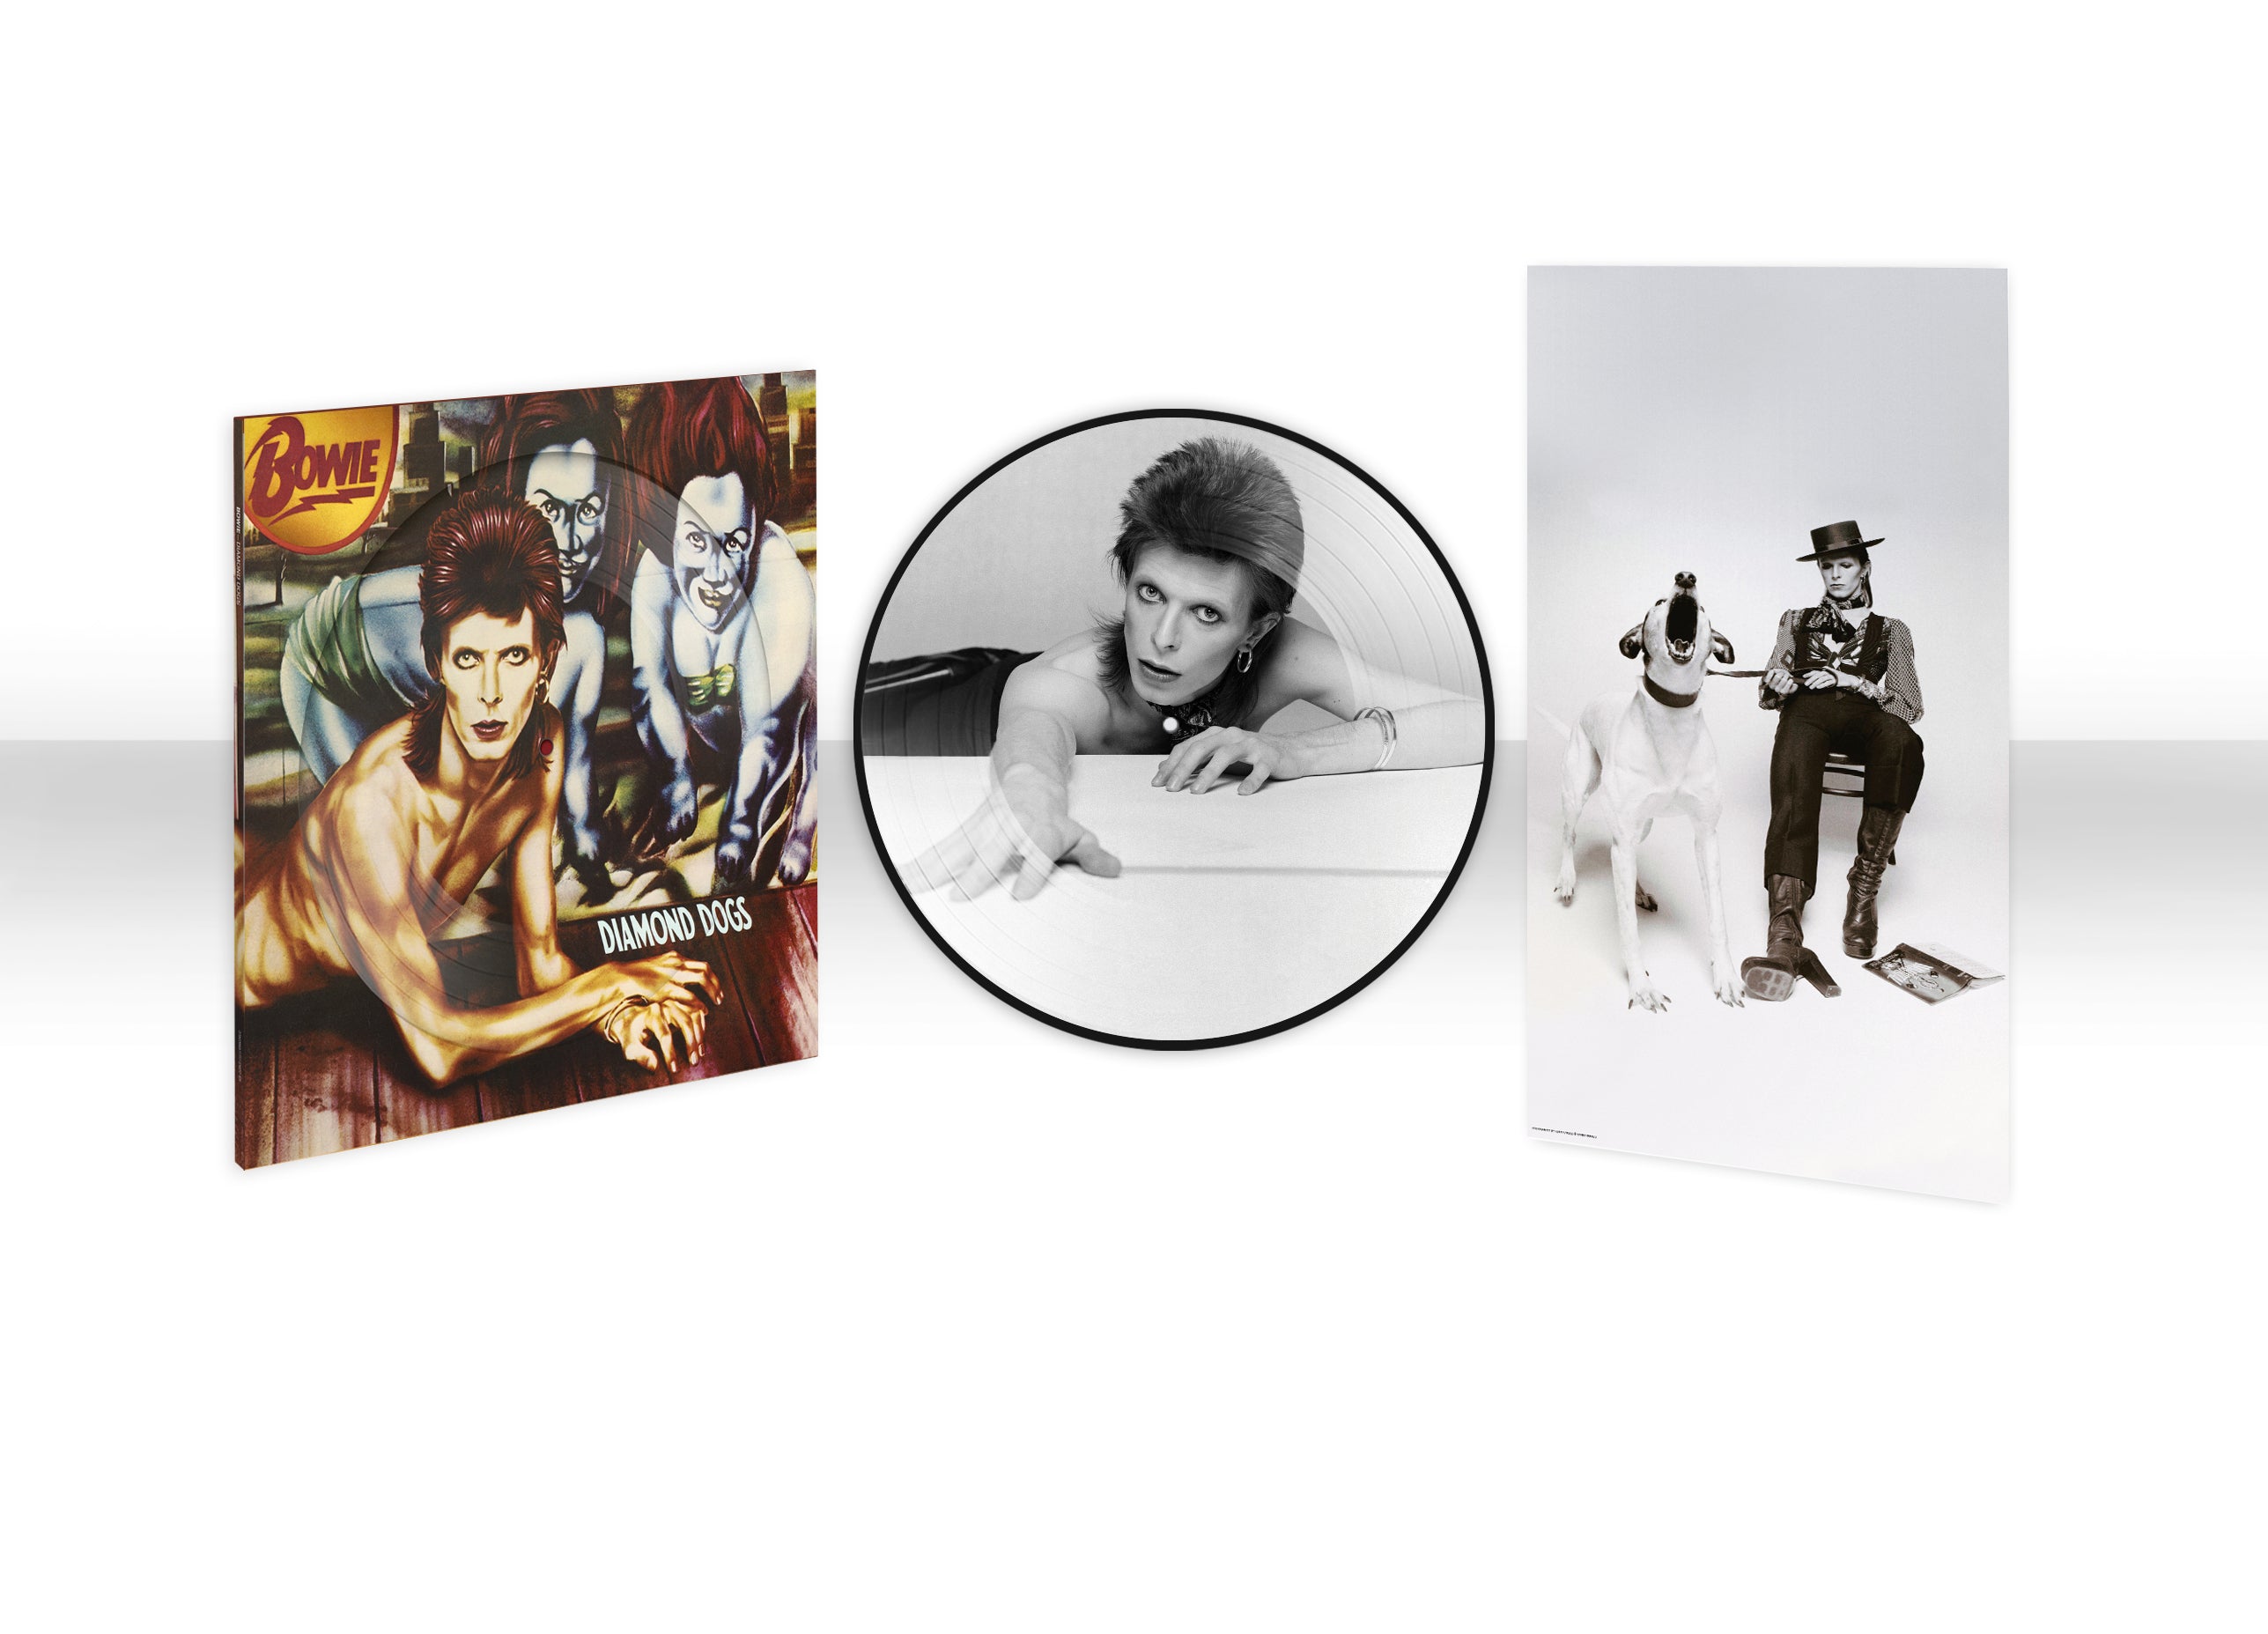 David Bowie - Diamond Dogs [50th Anniversary Picture Disc & Half-Speed Master]